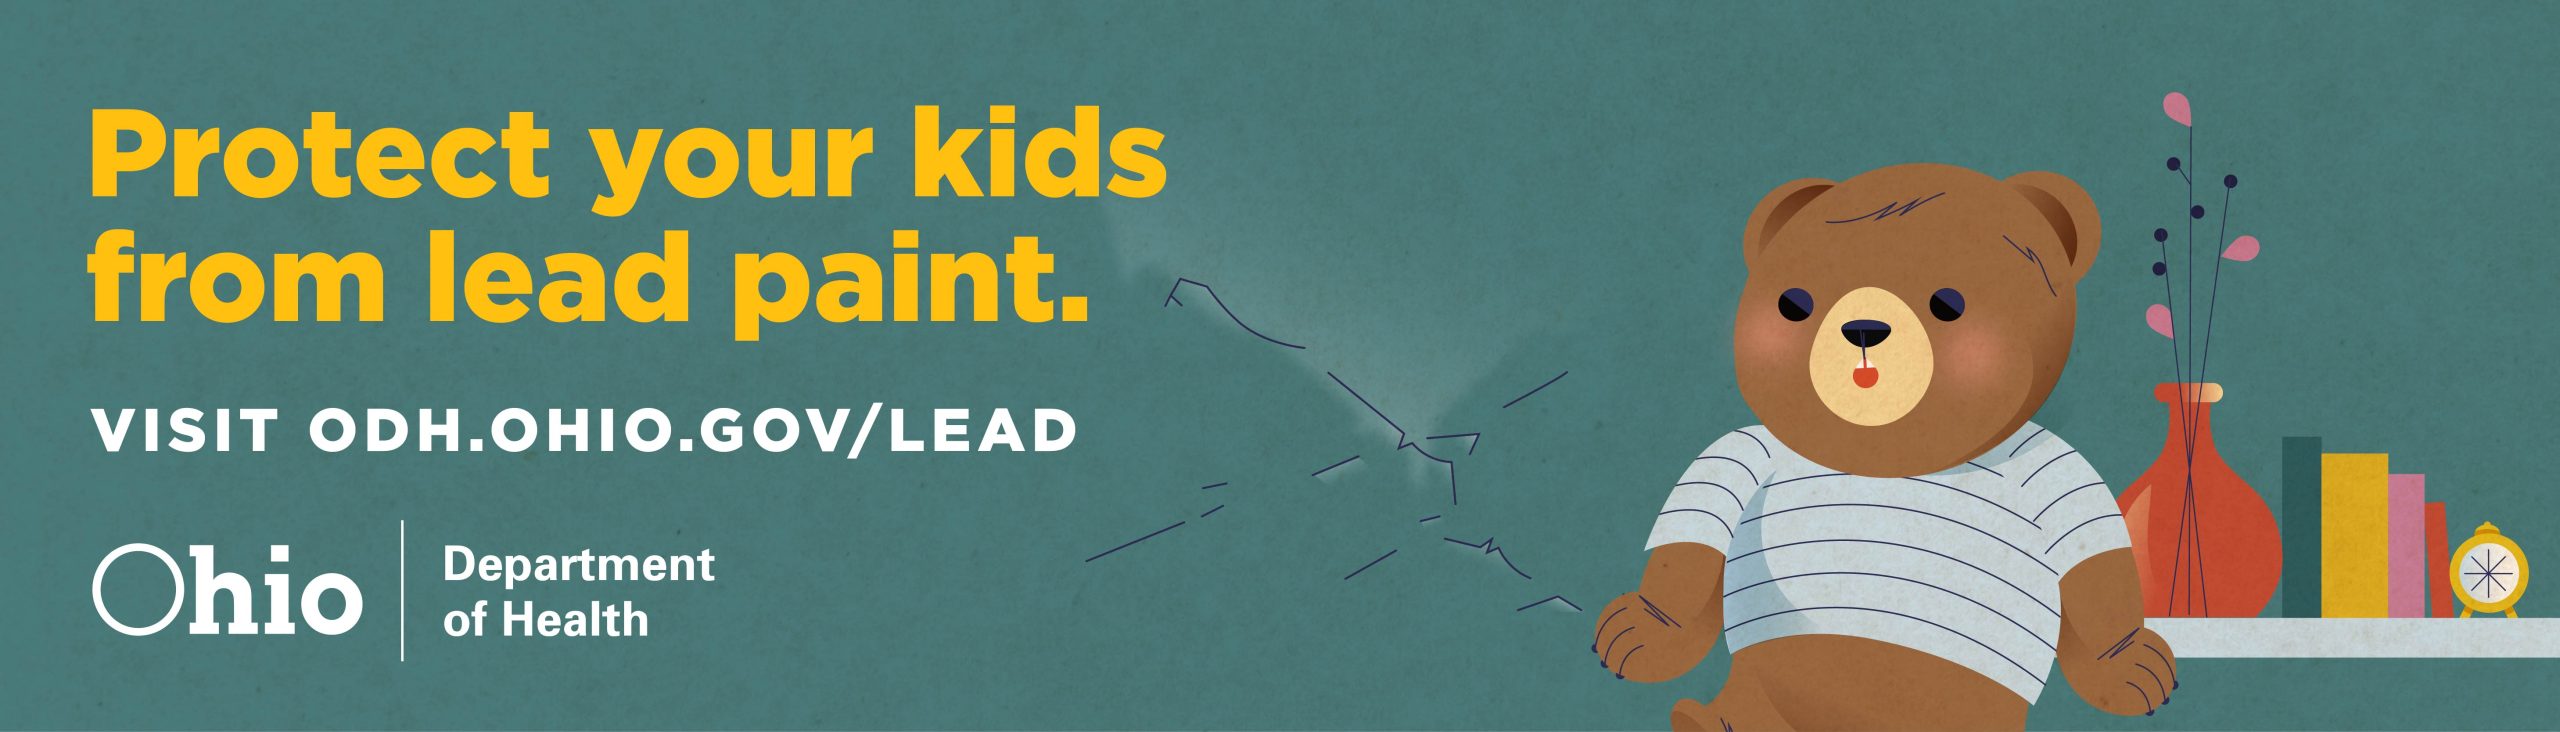 Protect your kids from Lead Paint